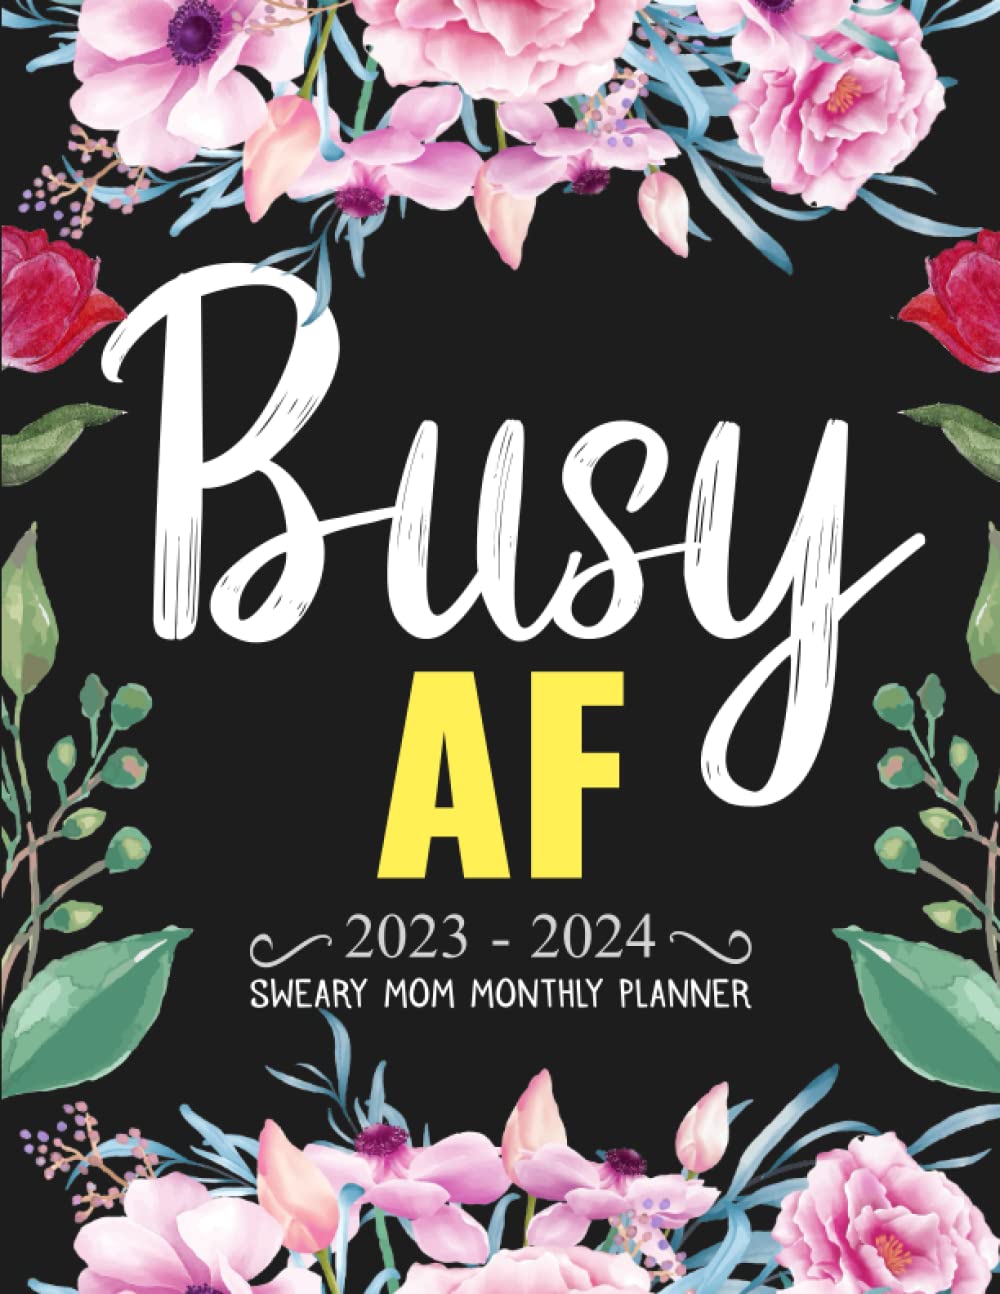 2023 2024 Busy Af Motivational Swear Words Affirmation Sweary Mom Monthly Planner 2 Year 24 